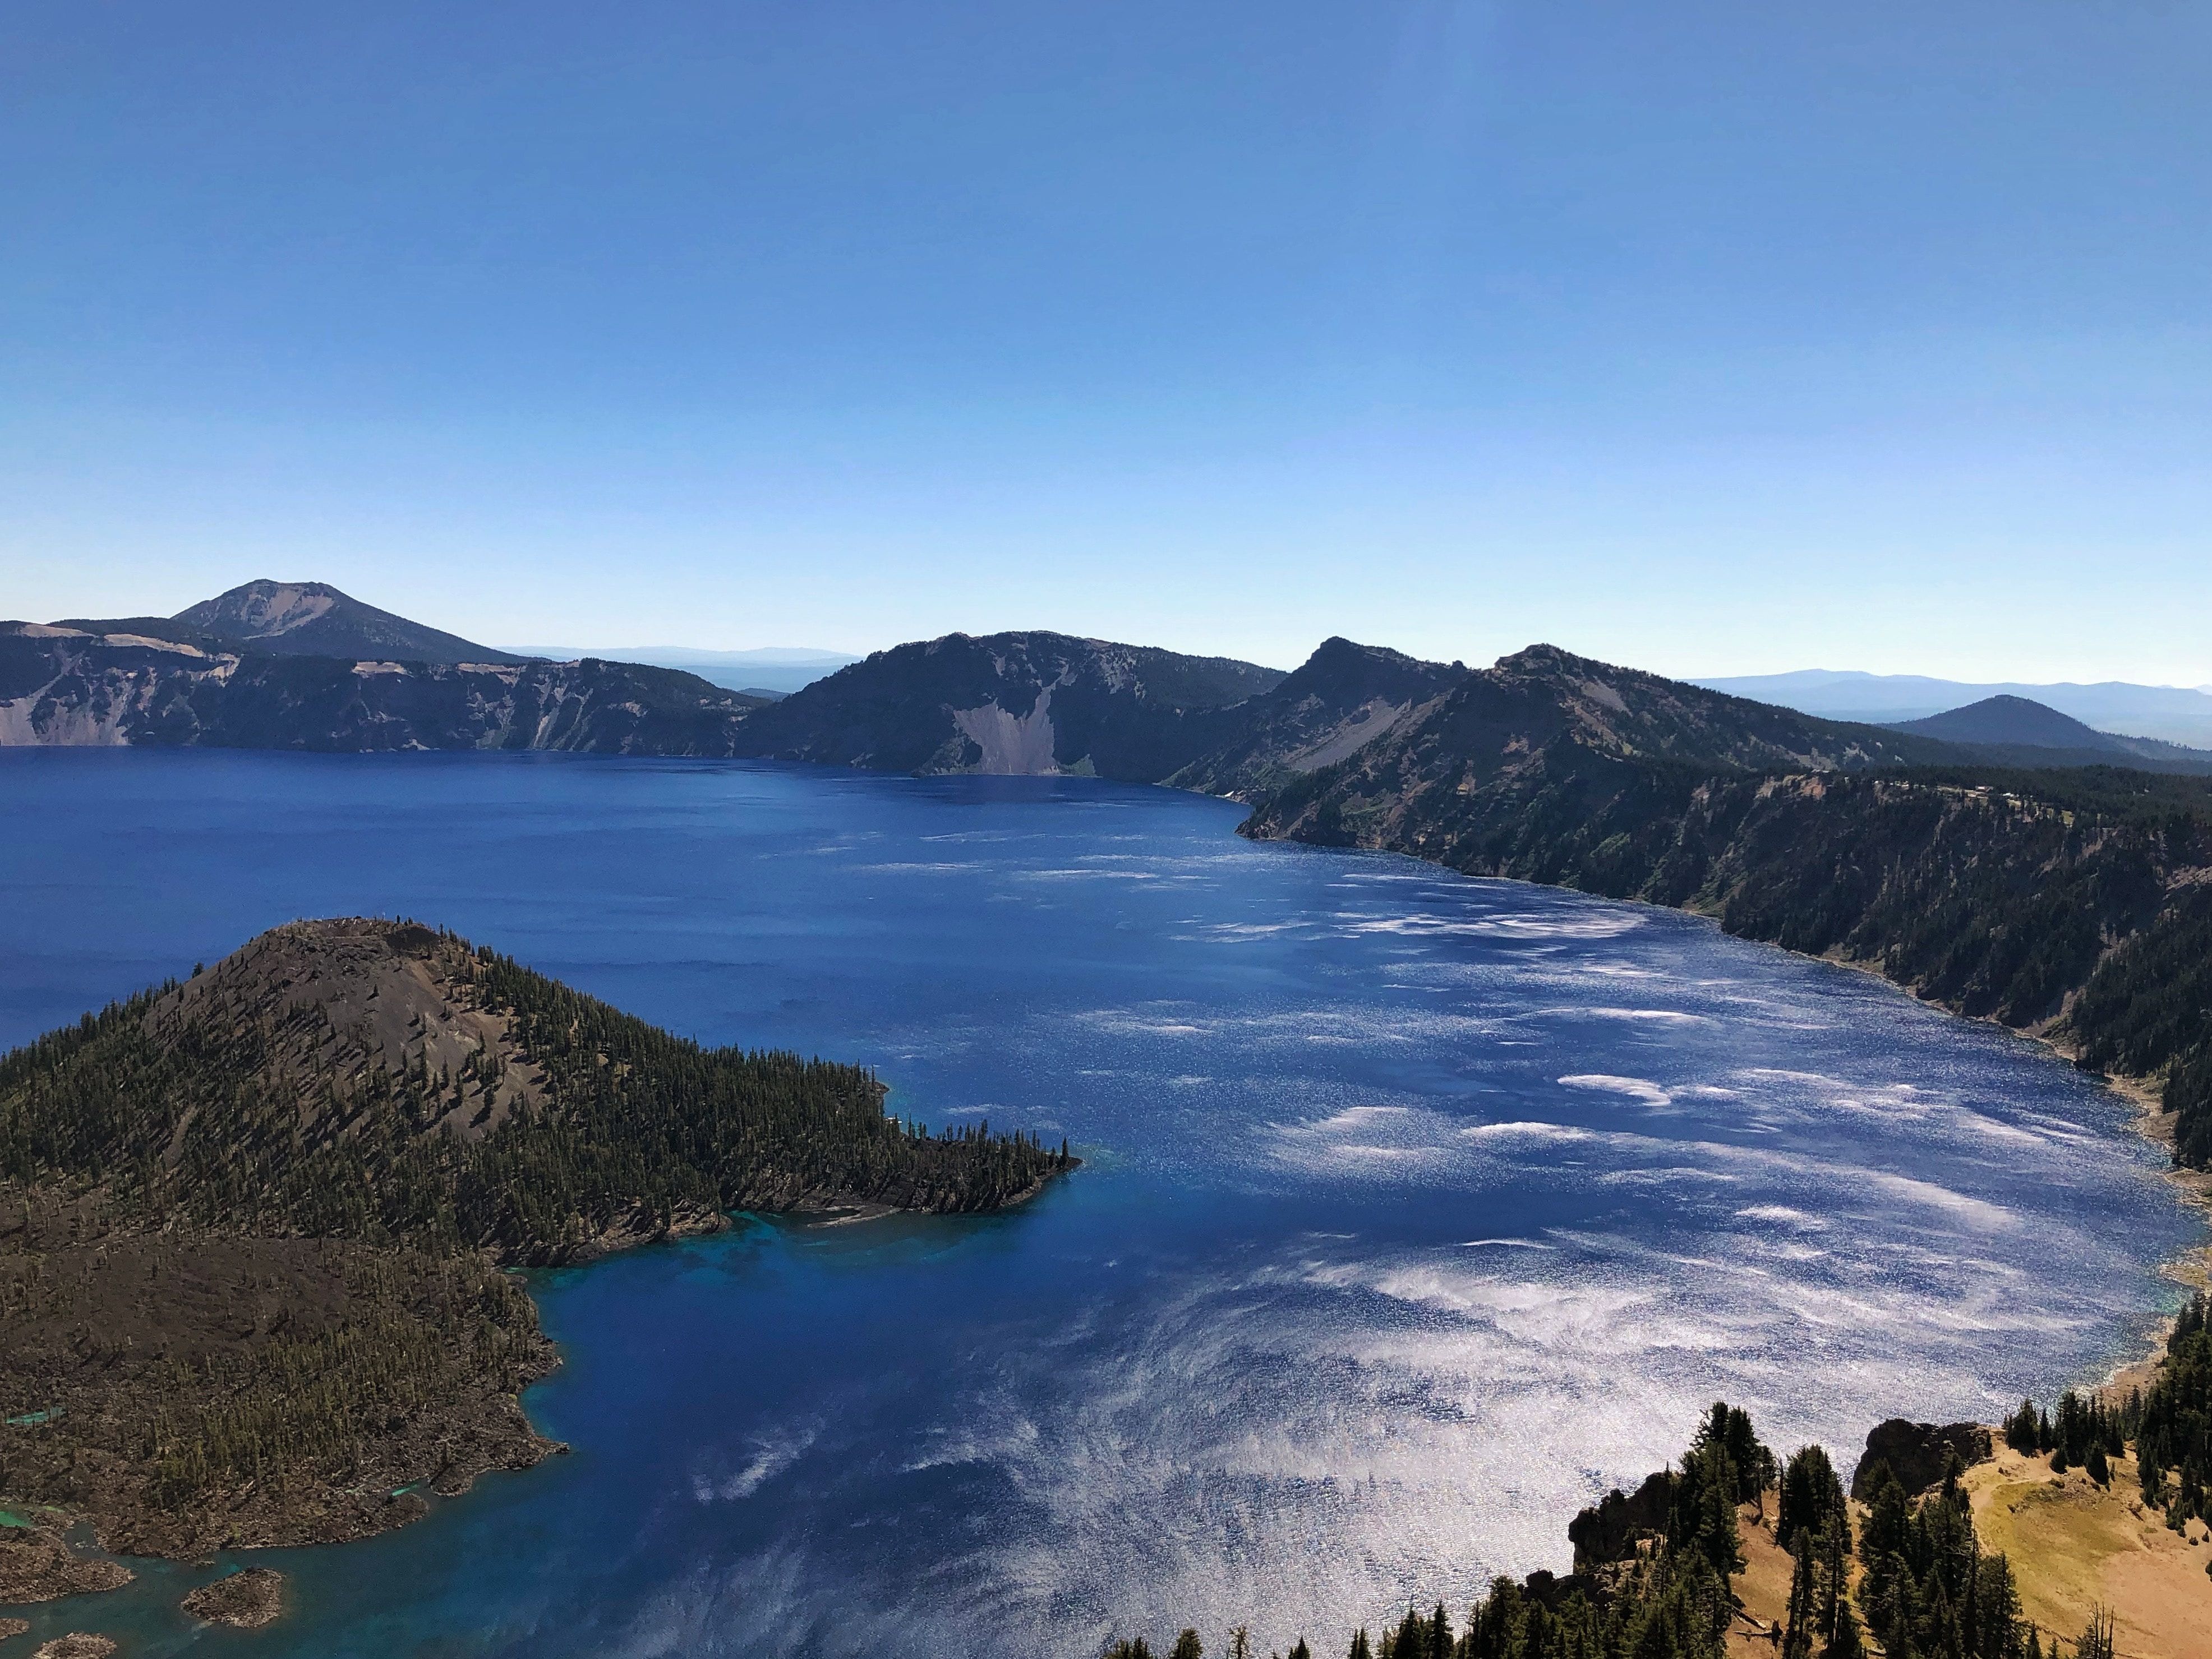 Viewpoint looking over Crater Lake 